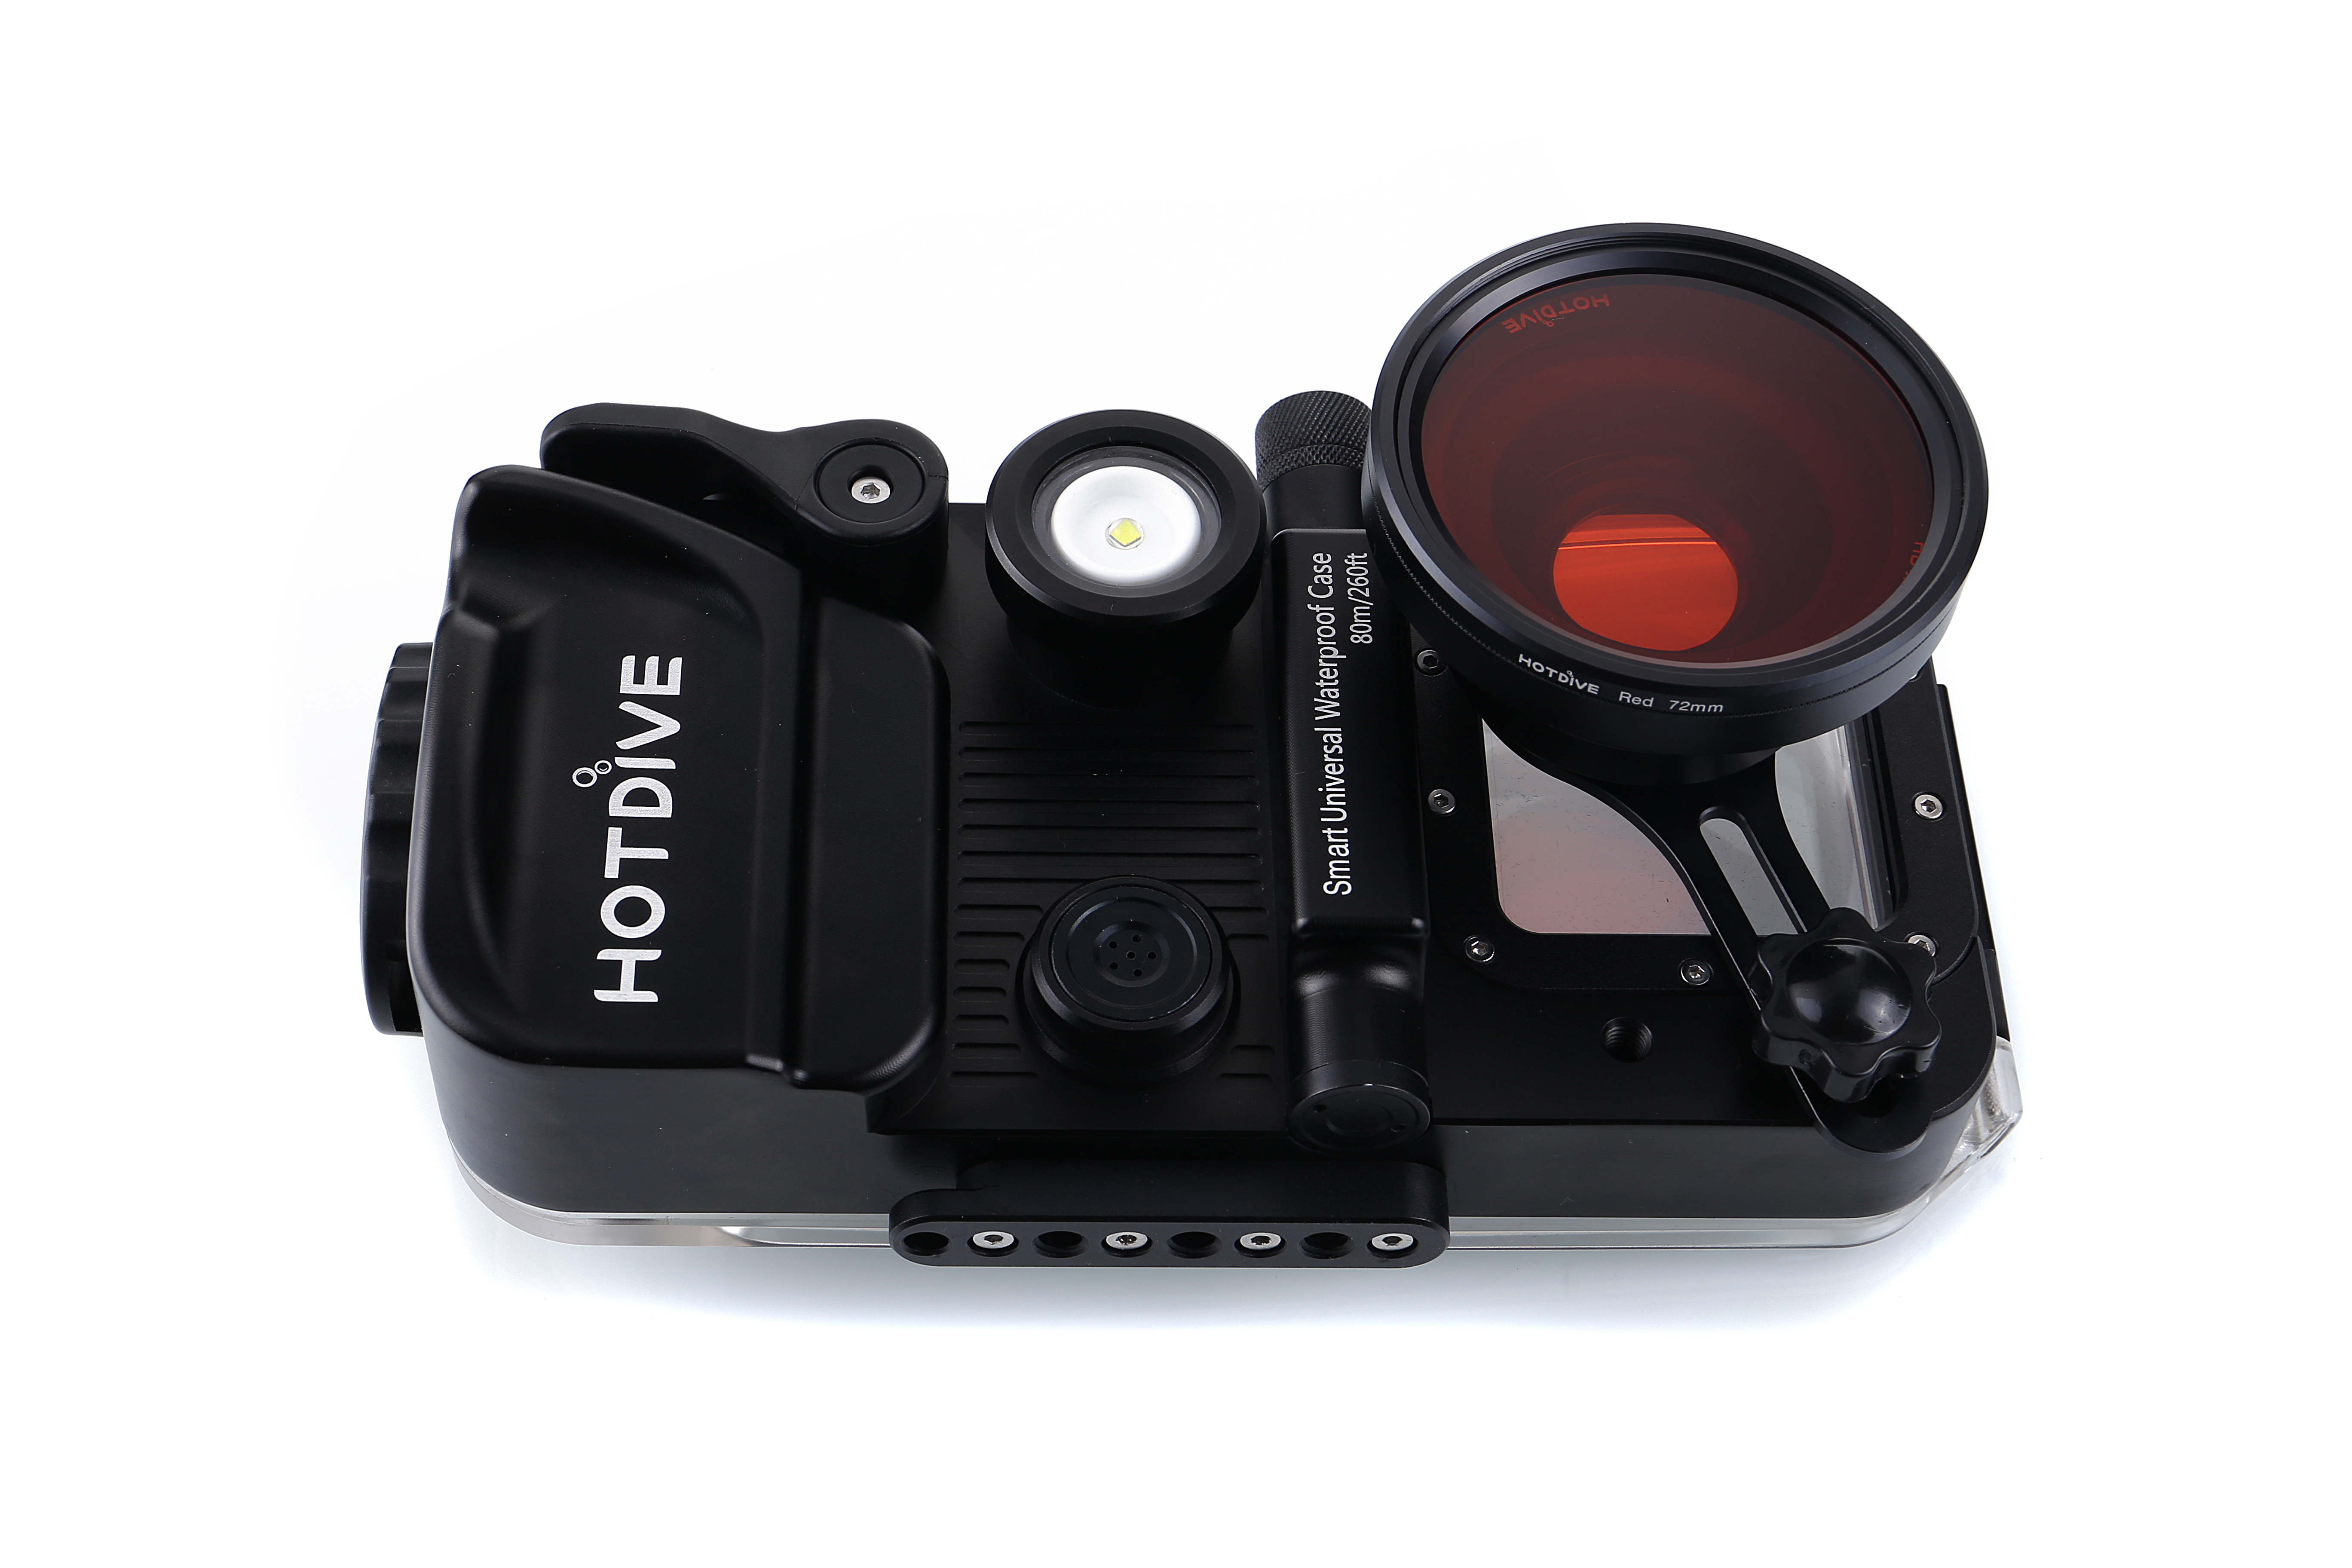 HotDive underwater housing with 72mm red filter and 0.39x wide angle lens